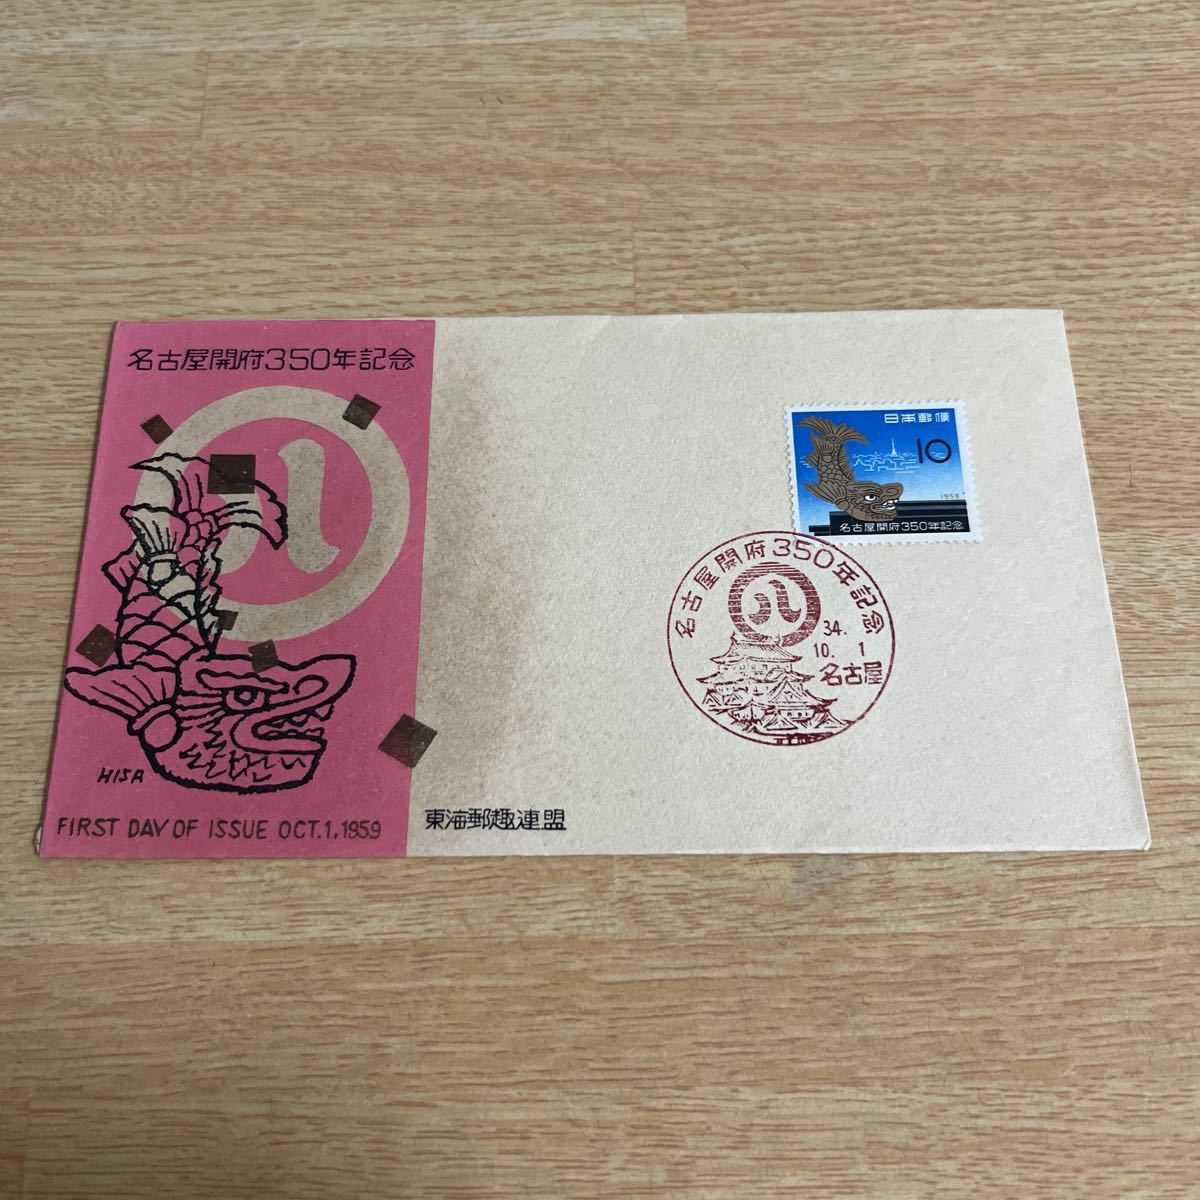 『O1』名古屋開府350年記念切手初日カバー　First day Cover FDC ★送料84円★昭和34年_画像1